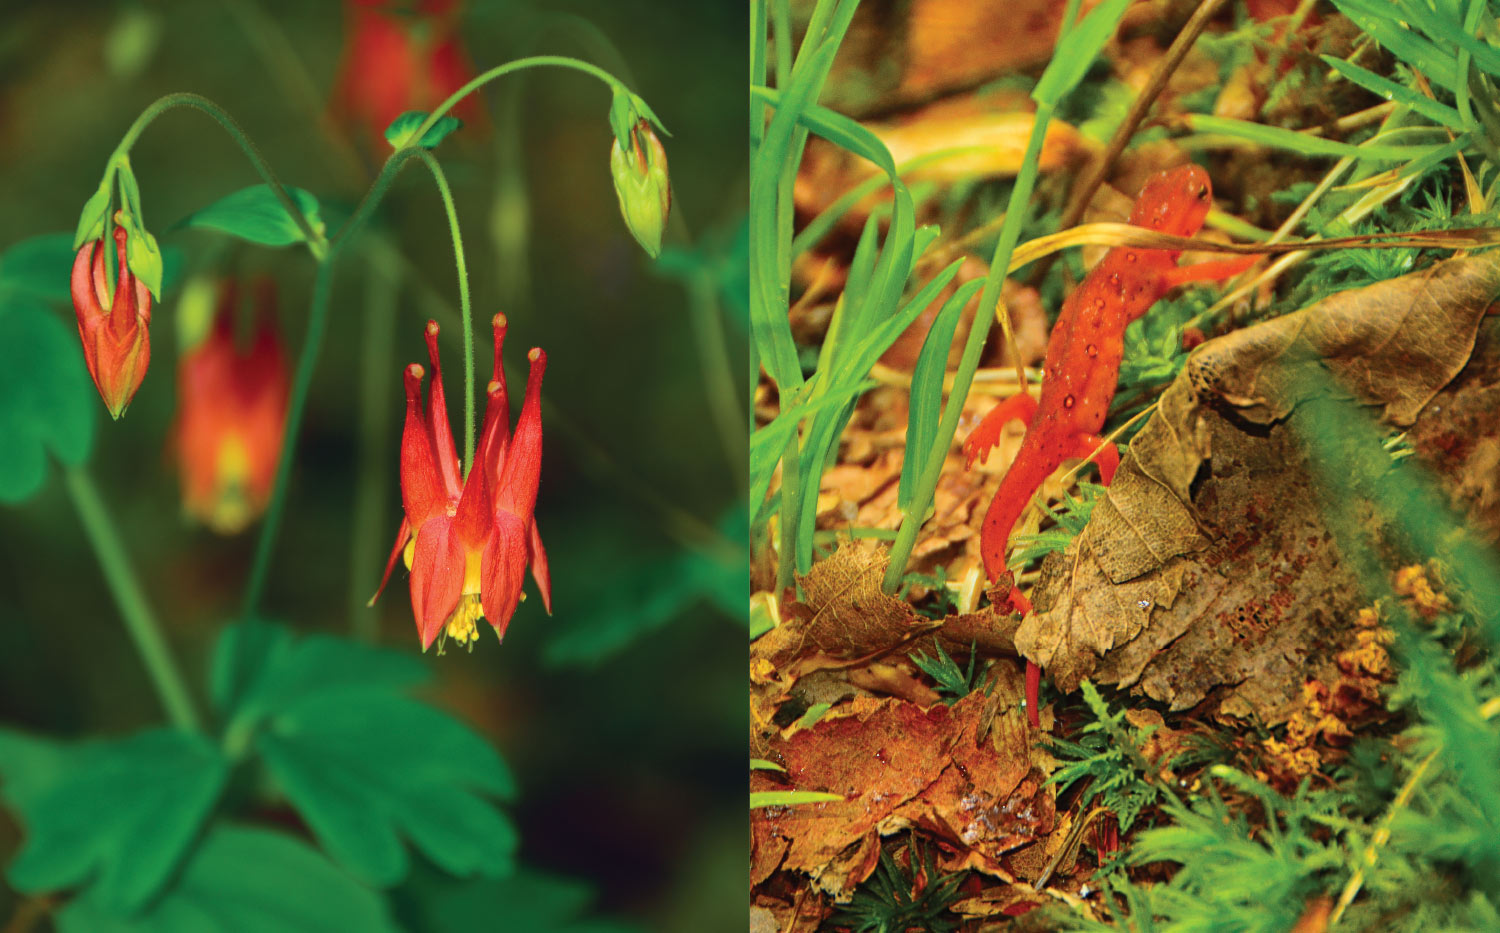 A healthy forest supports native flora and fauna like red columbine